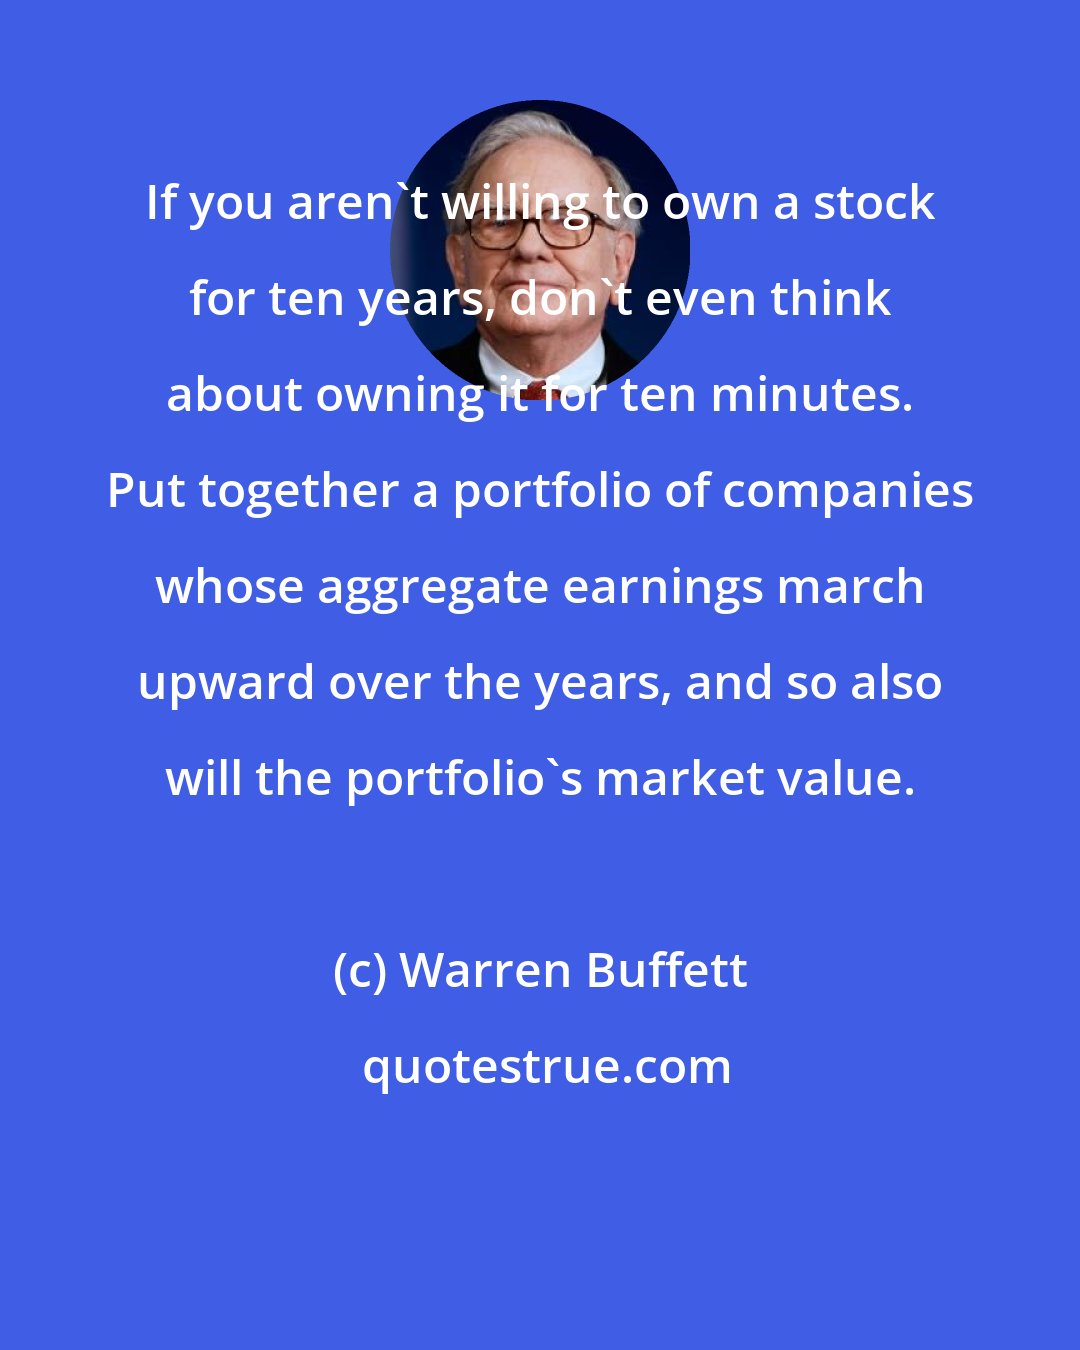 Warren Buffett: If you aren't willing to own a stock for ten years, don't even think about owning it for ten minutes. Put together a portfolio of companies whose aggregate earnings march upward over the years, and so also will the portfolio's market value.